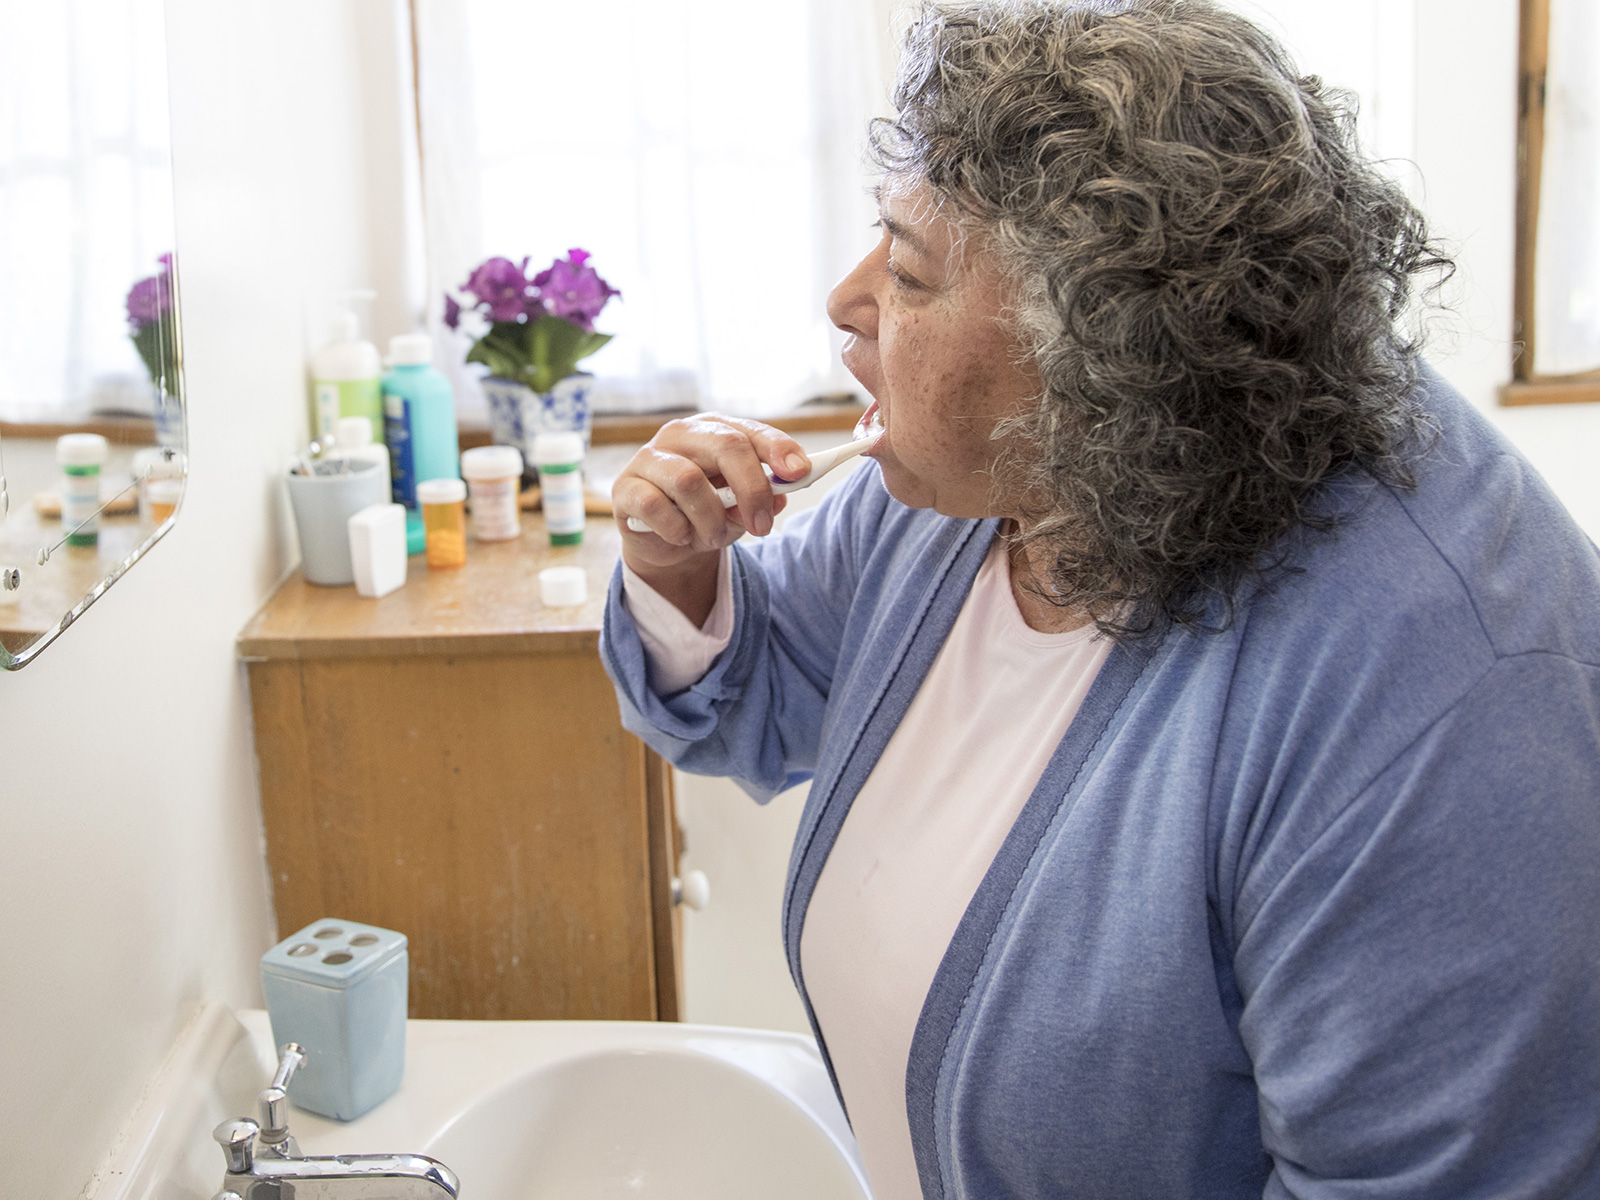 A woman brushes her teeth in the bathroom.